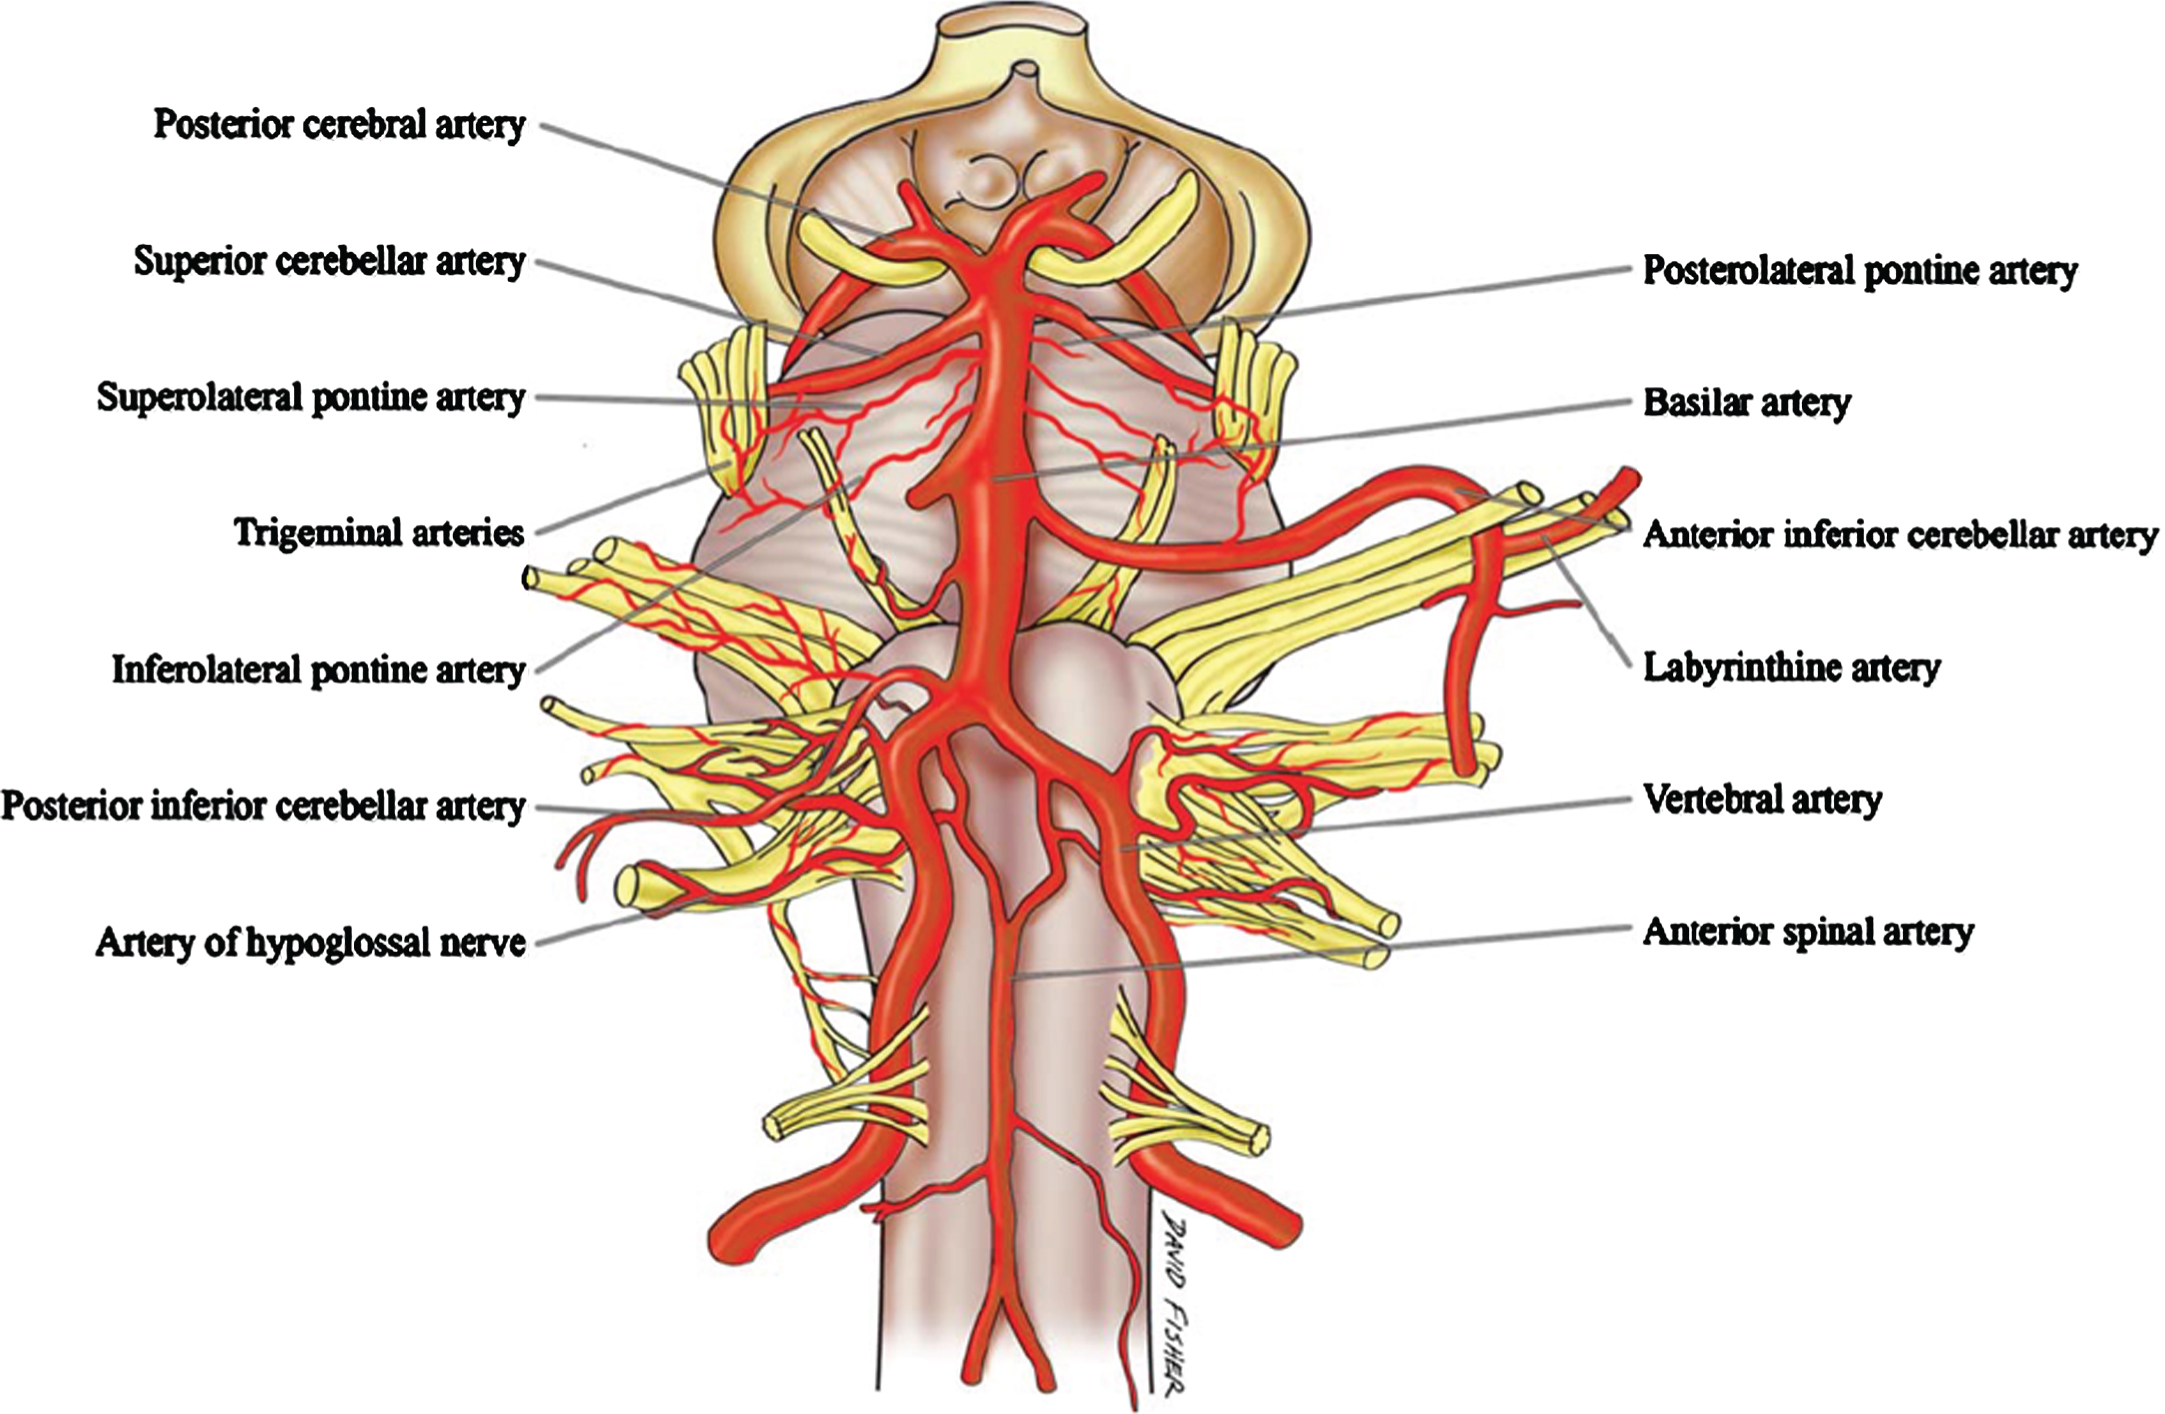 Brain stem pons and oblongata nerves (yellow) that project into the surrounding CSF and arteries, probably providing CSF flow-restricting objects that could, under the right pulse energy conditions, result in the formation of CSF flow stress-induced neurotoxic oligomers. These molecules could inactivate these nerves. The lower oblongata region is the pathological origin of Parkinson’s disease and ALS. Source [61] with permission.